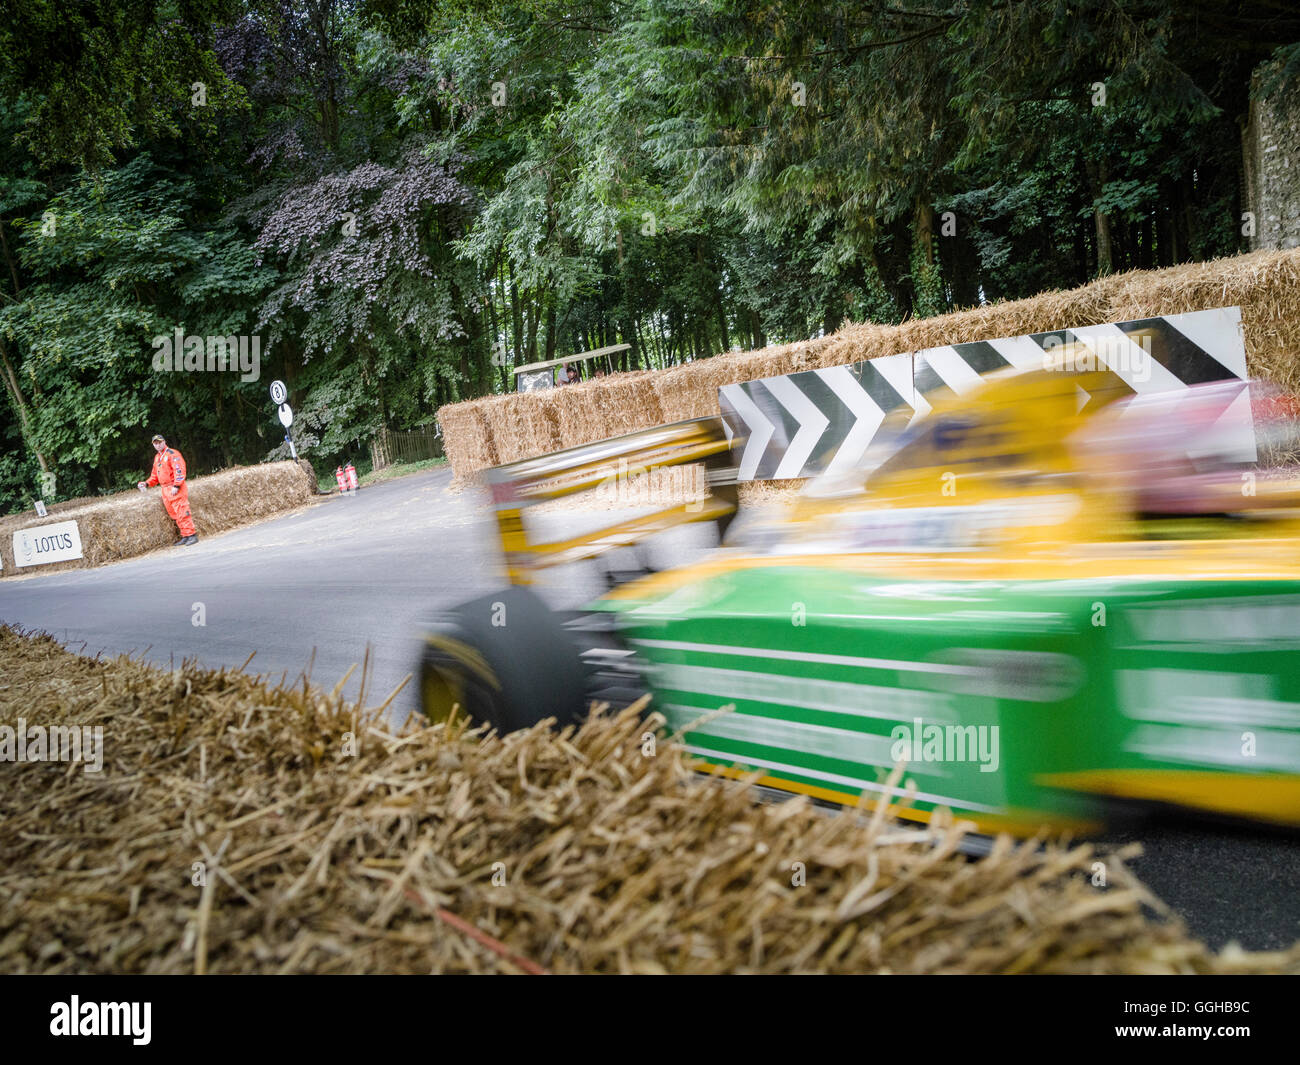 Benetton-Ford B192 Formula 1 racing car, Goodwood Festival of Speed 2014, racing, car racing, classic car, Chichester, Sussex, U Stock Photo